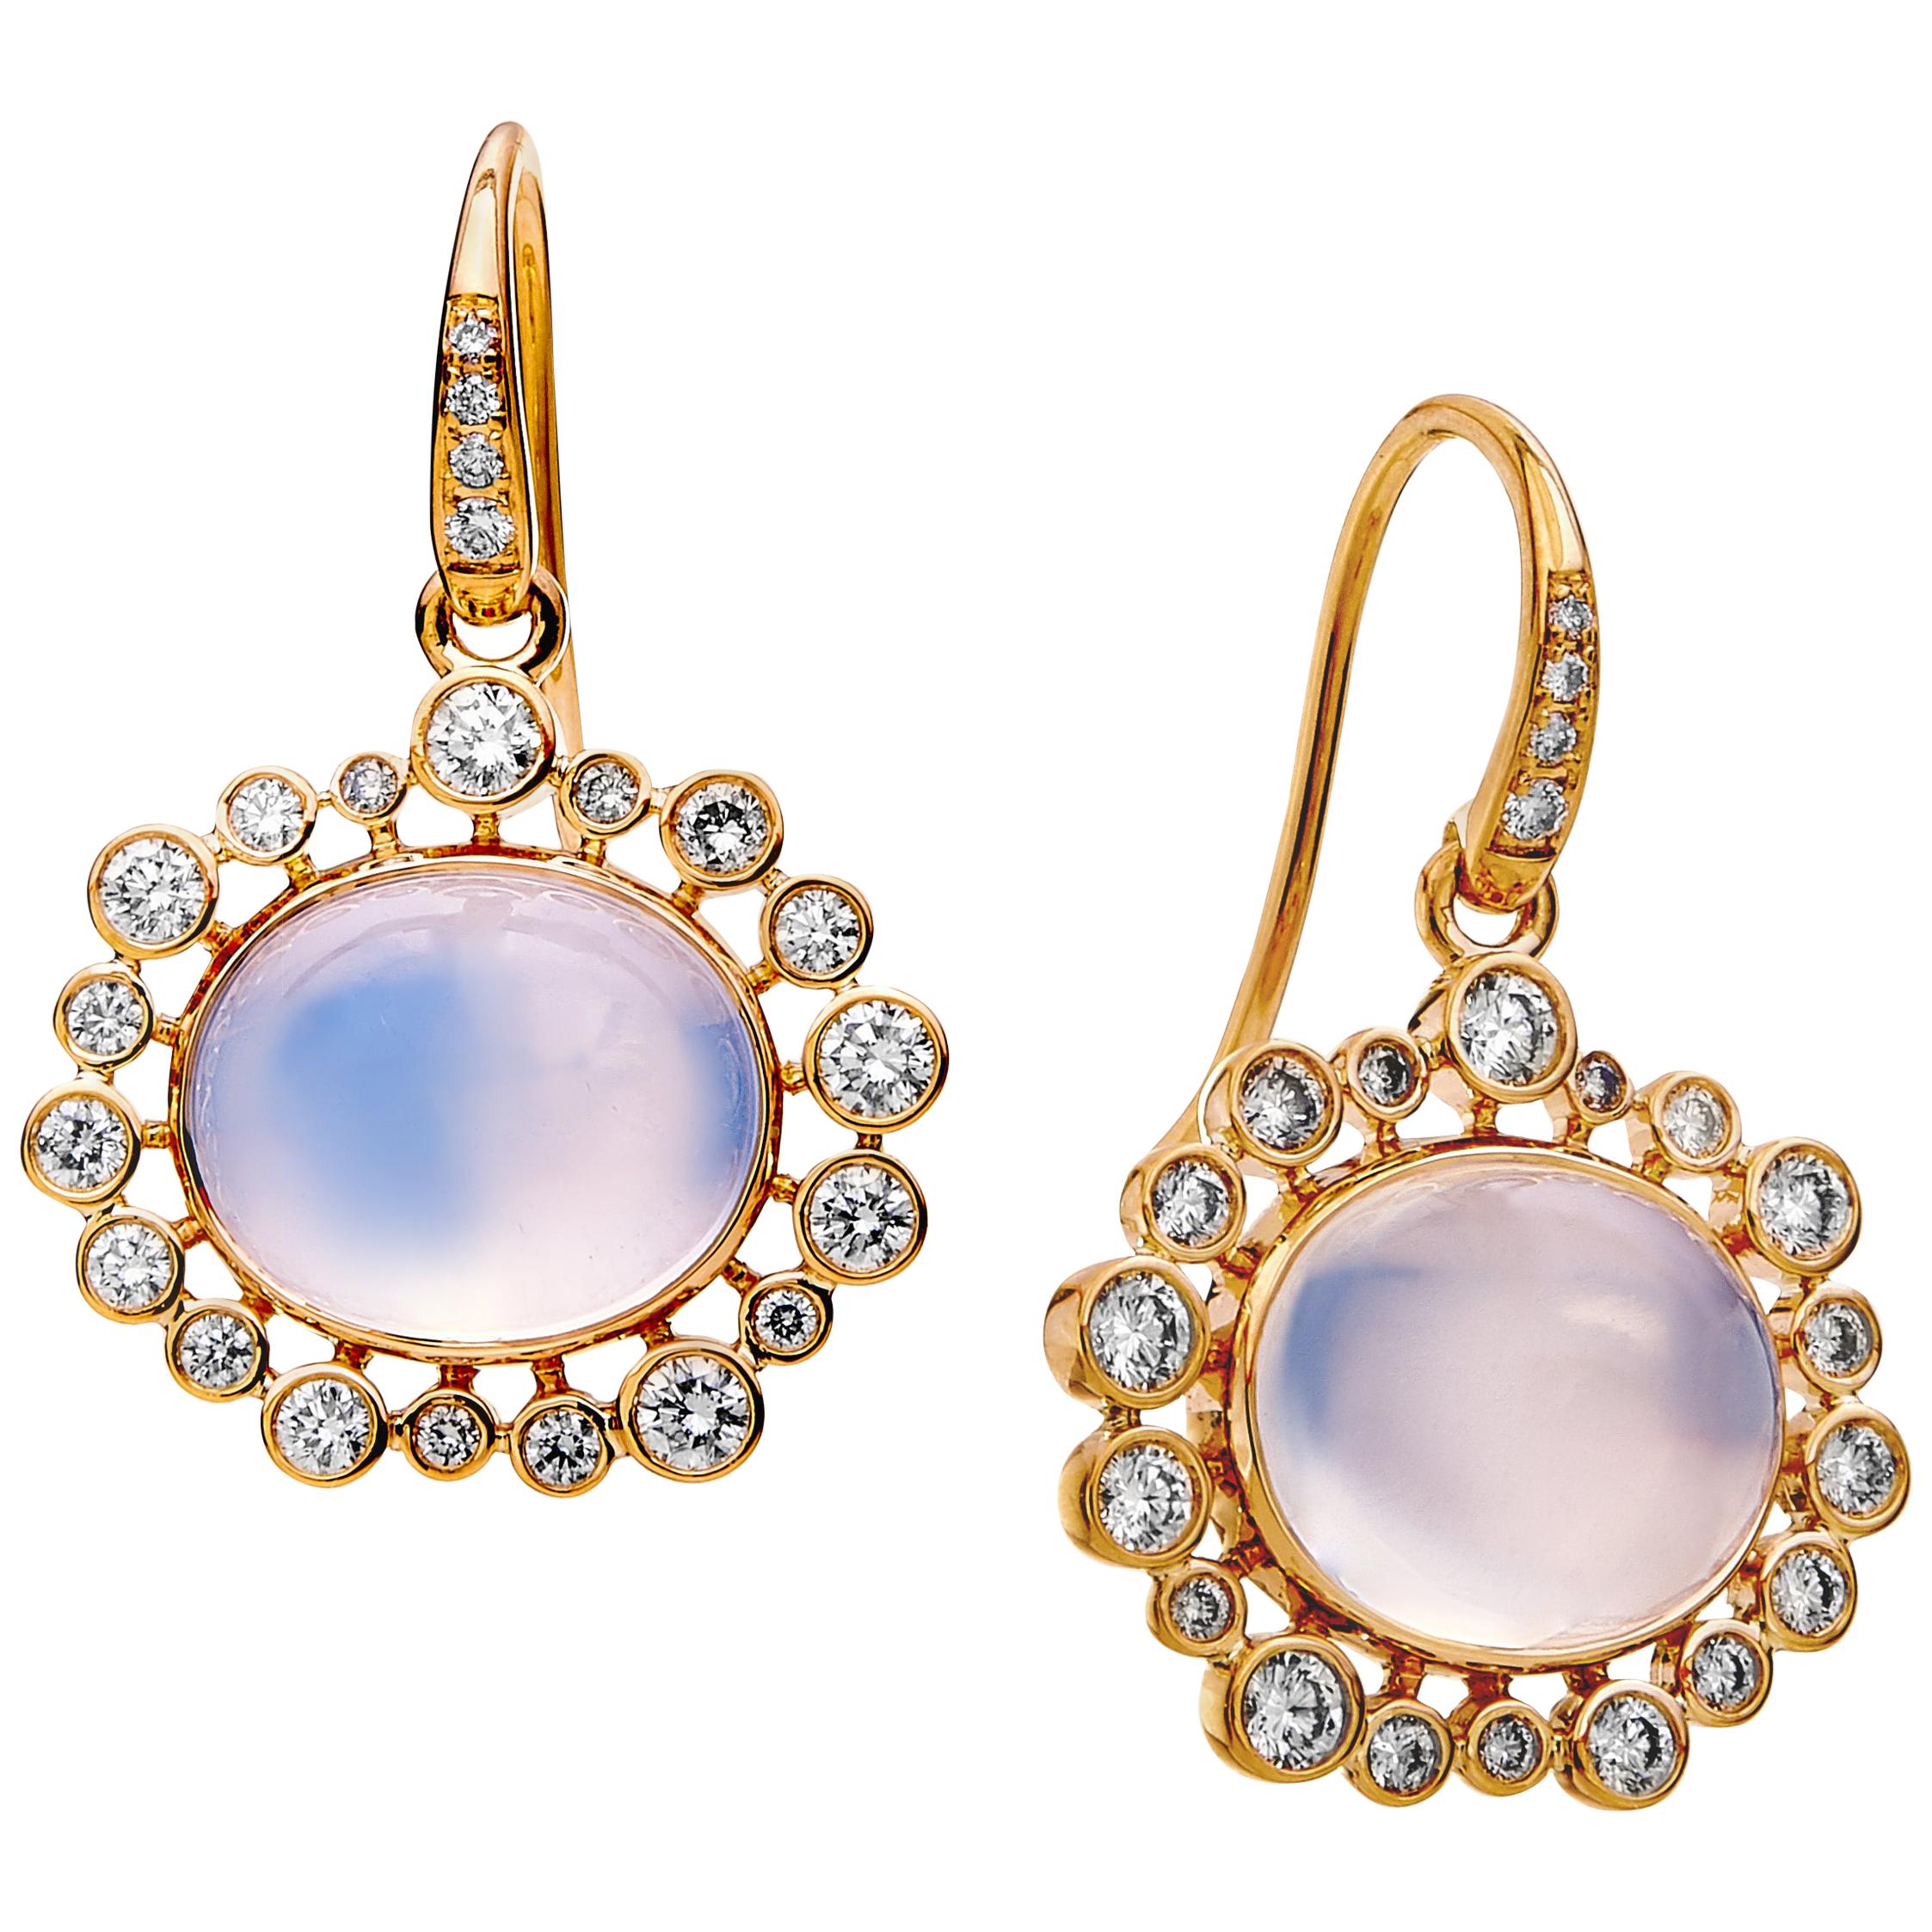 Syna Yellow Gold Moon Quartz Earrings with Diamonds